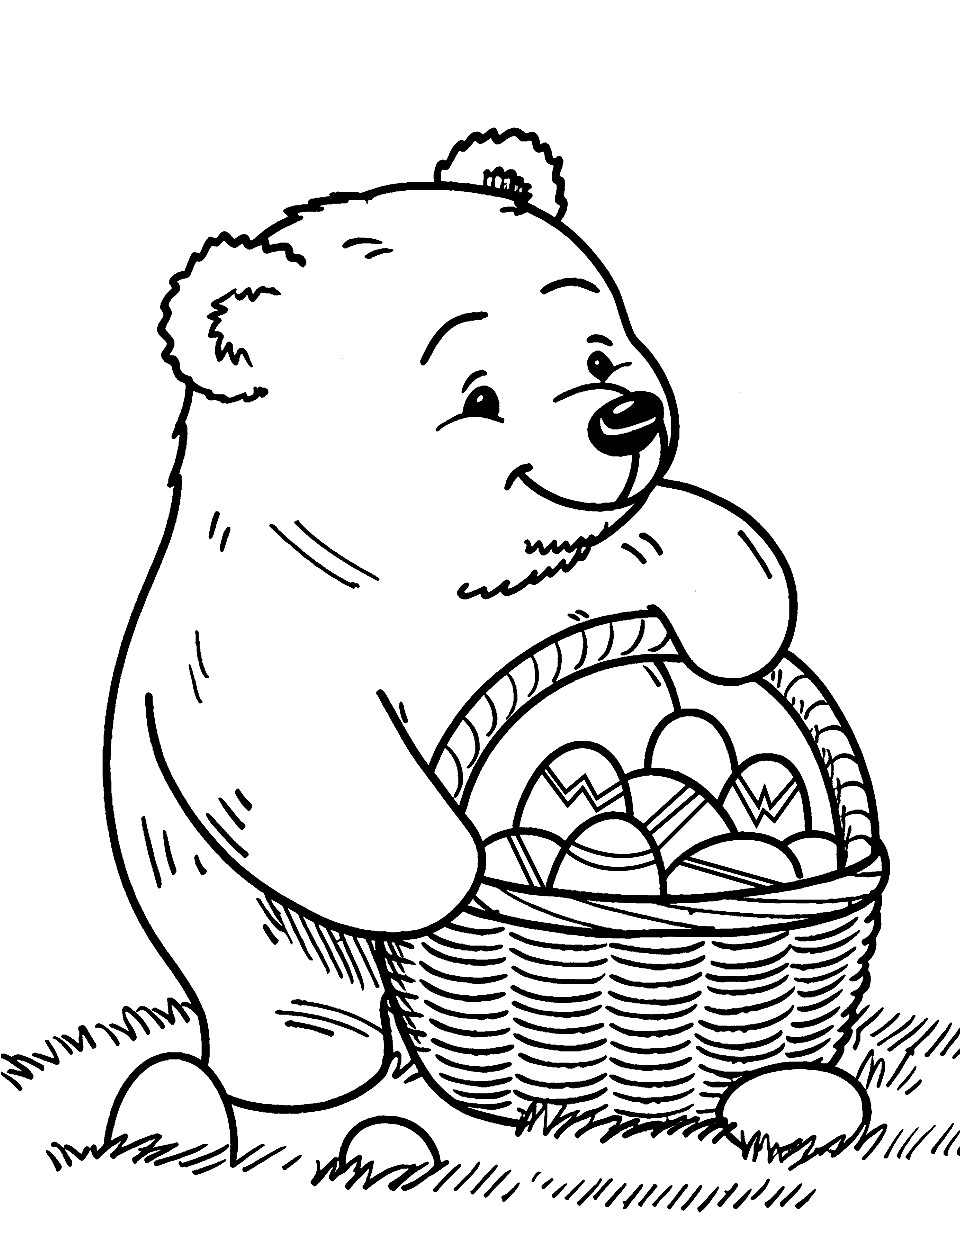 Easter Teddy Bear Egg Hunt Coloring Page - A teddy bear with a basket looking for Easter eggs.